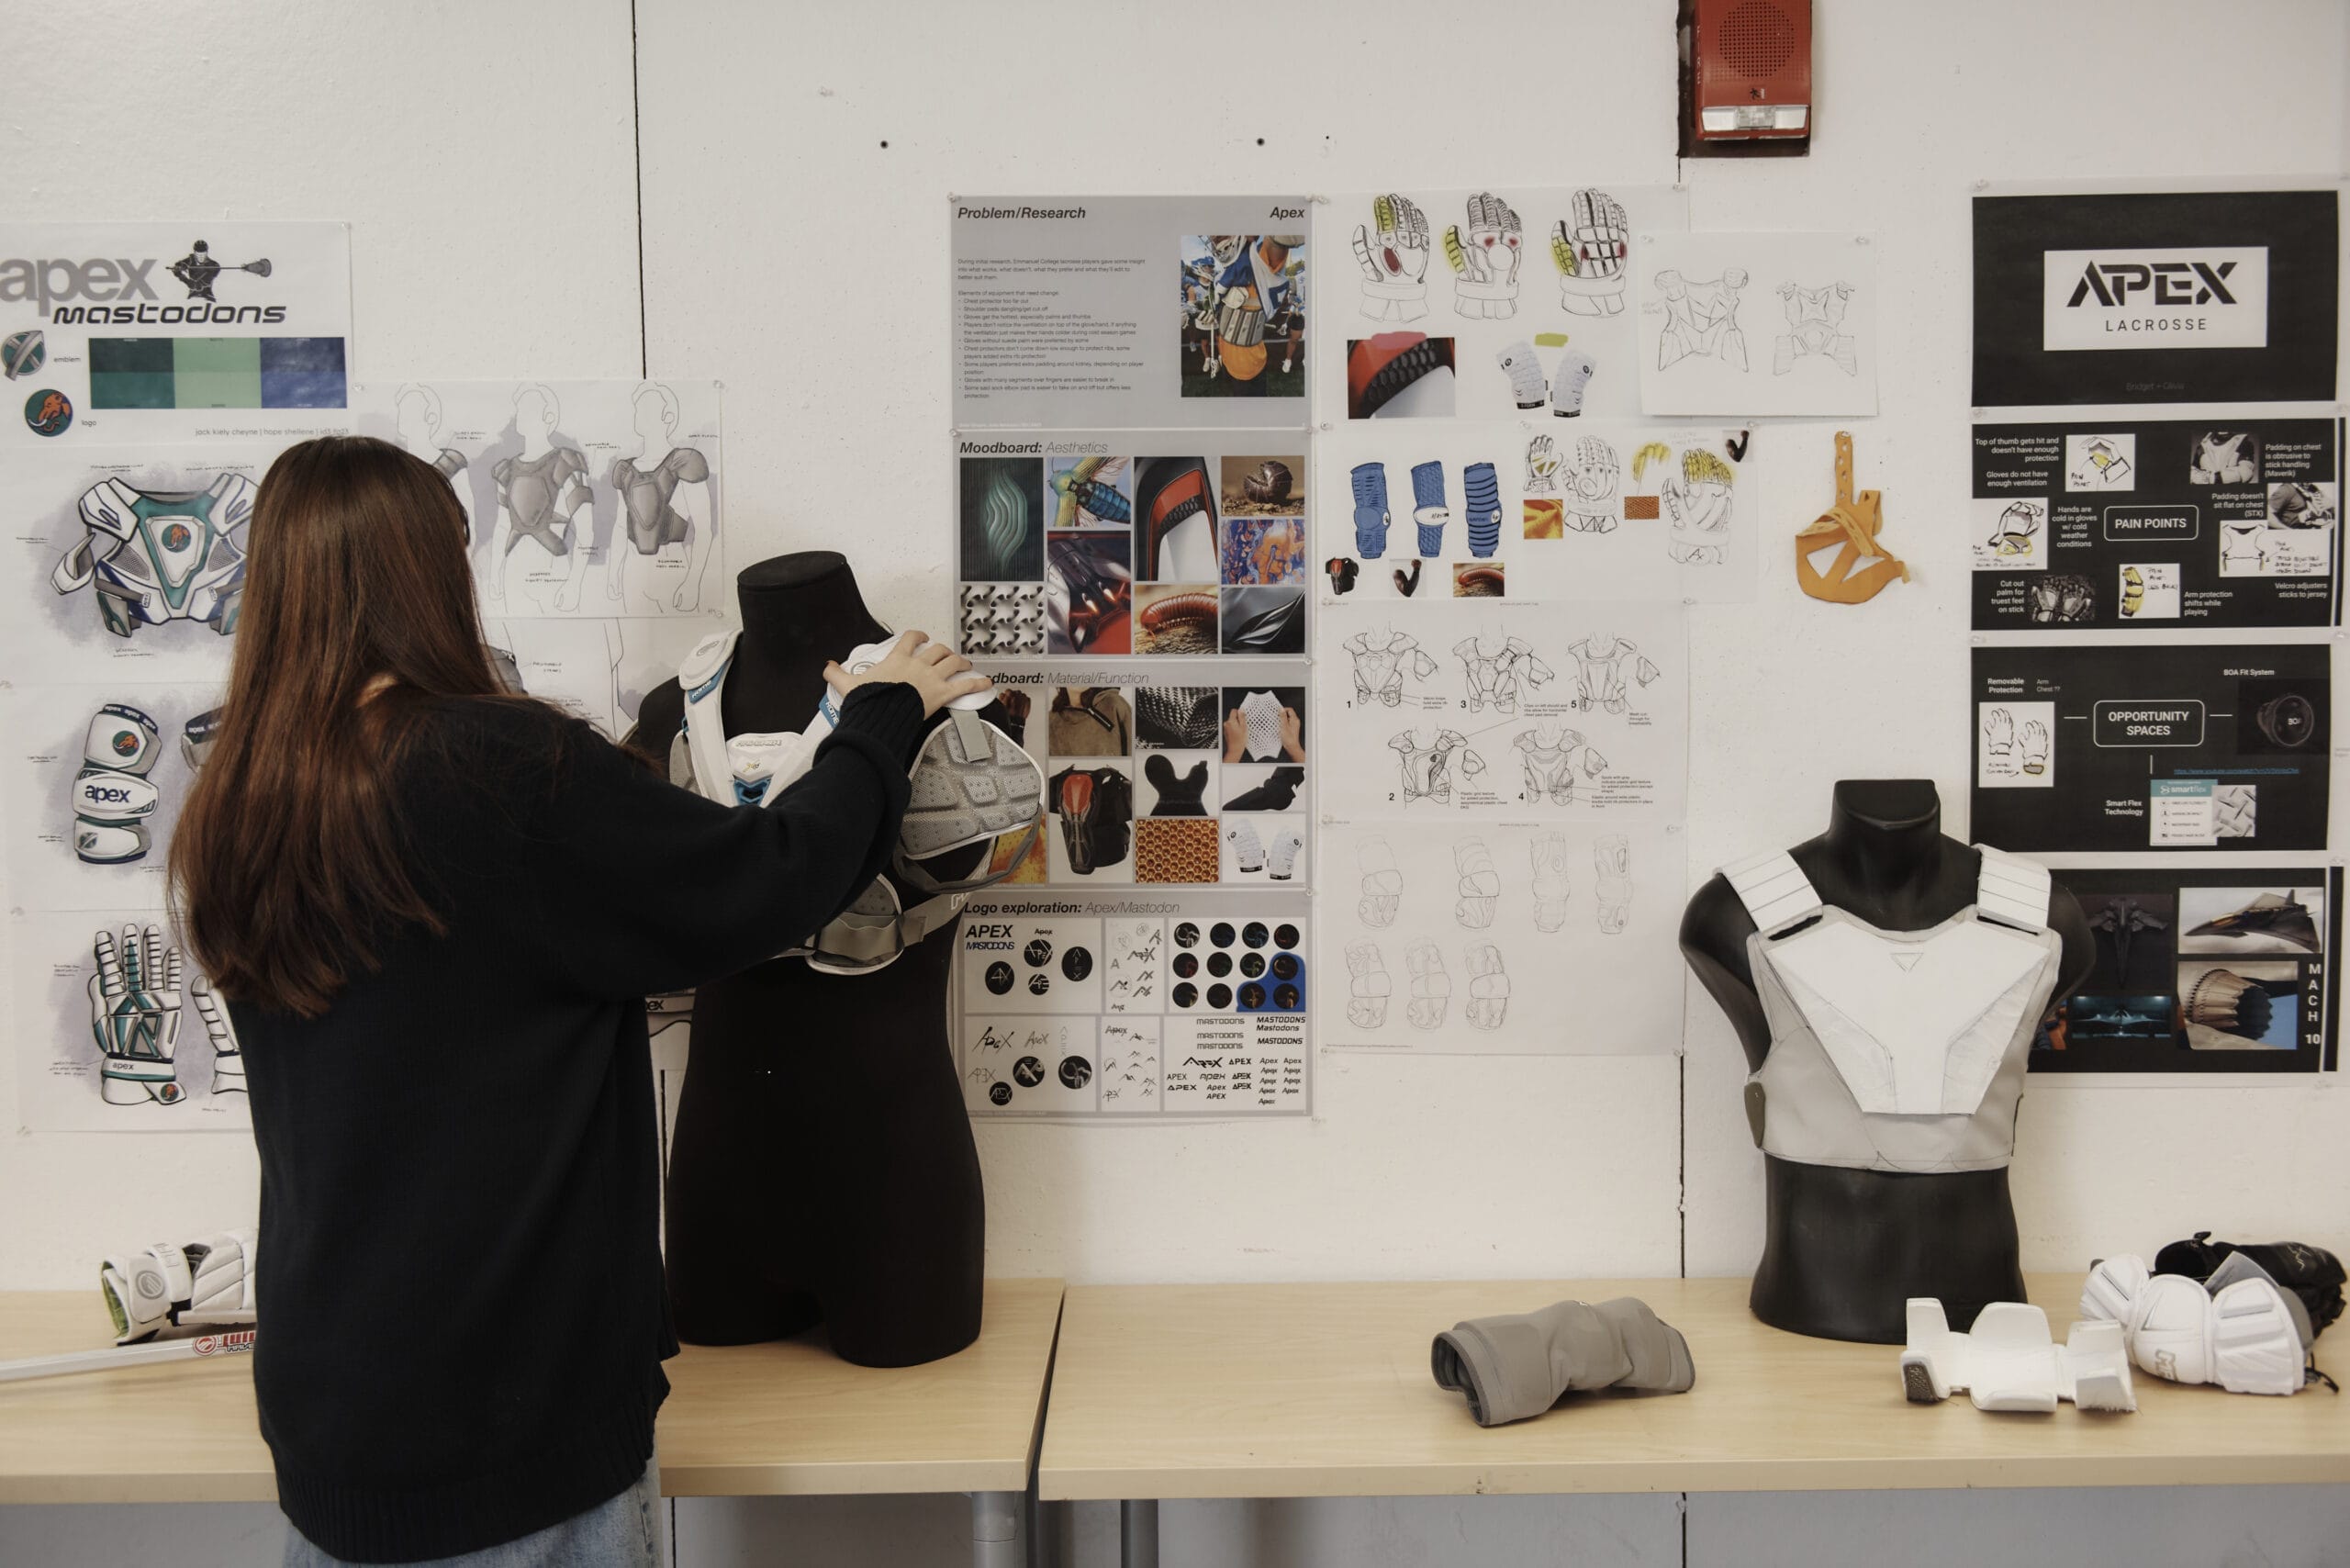 An industrial design student adjusts her product work on display.